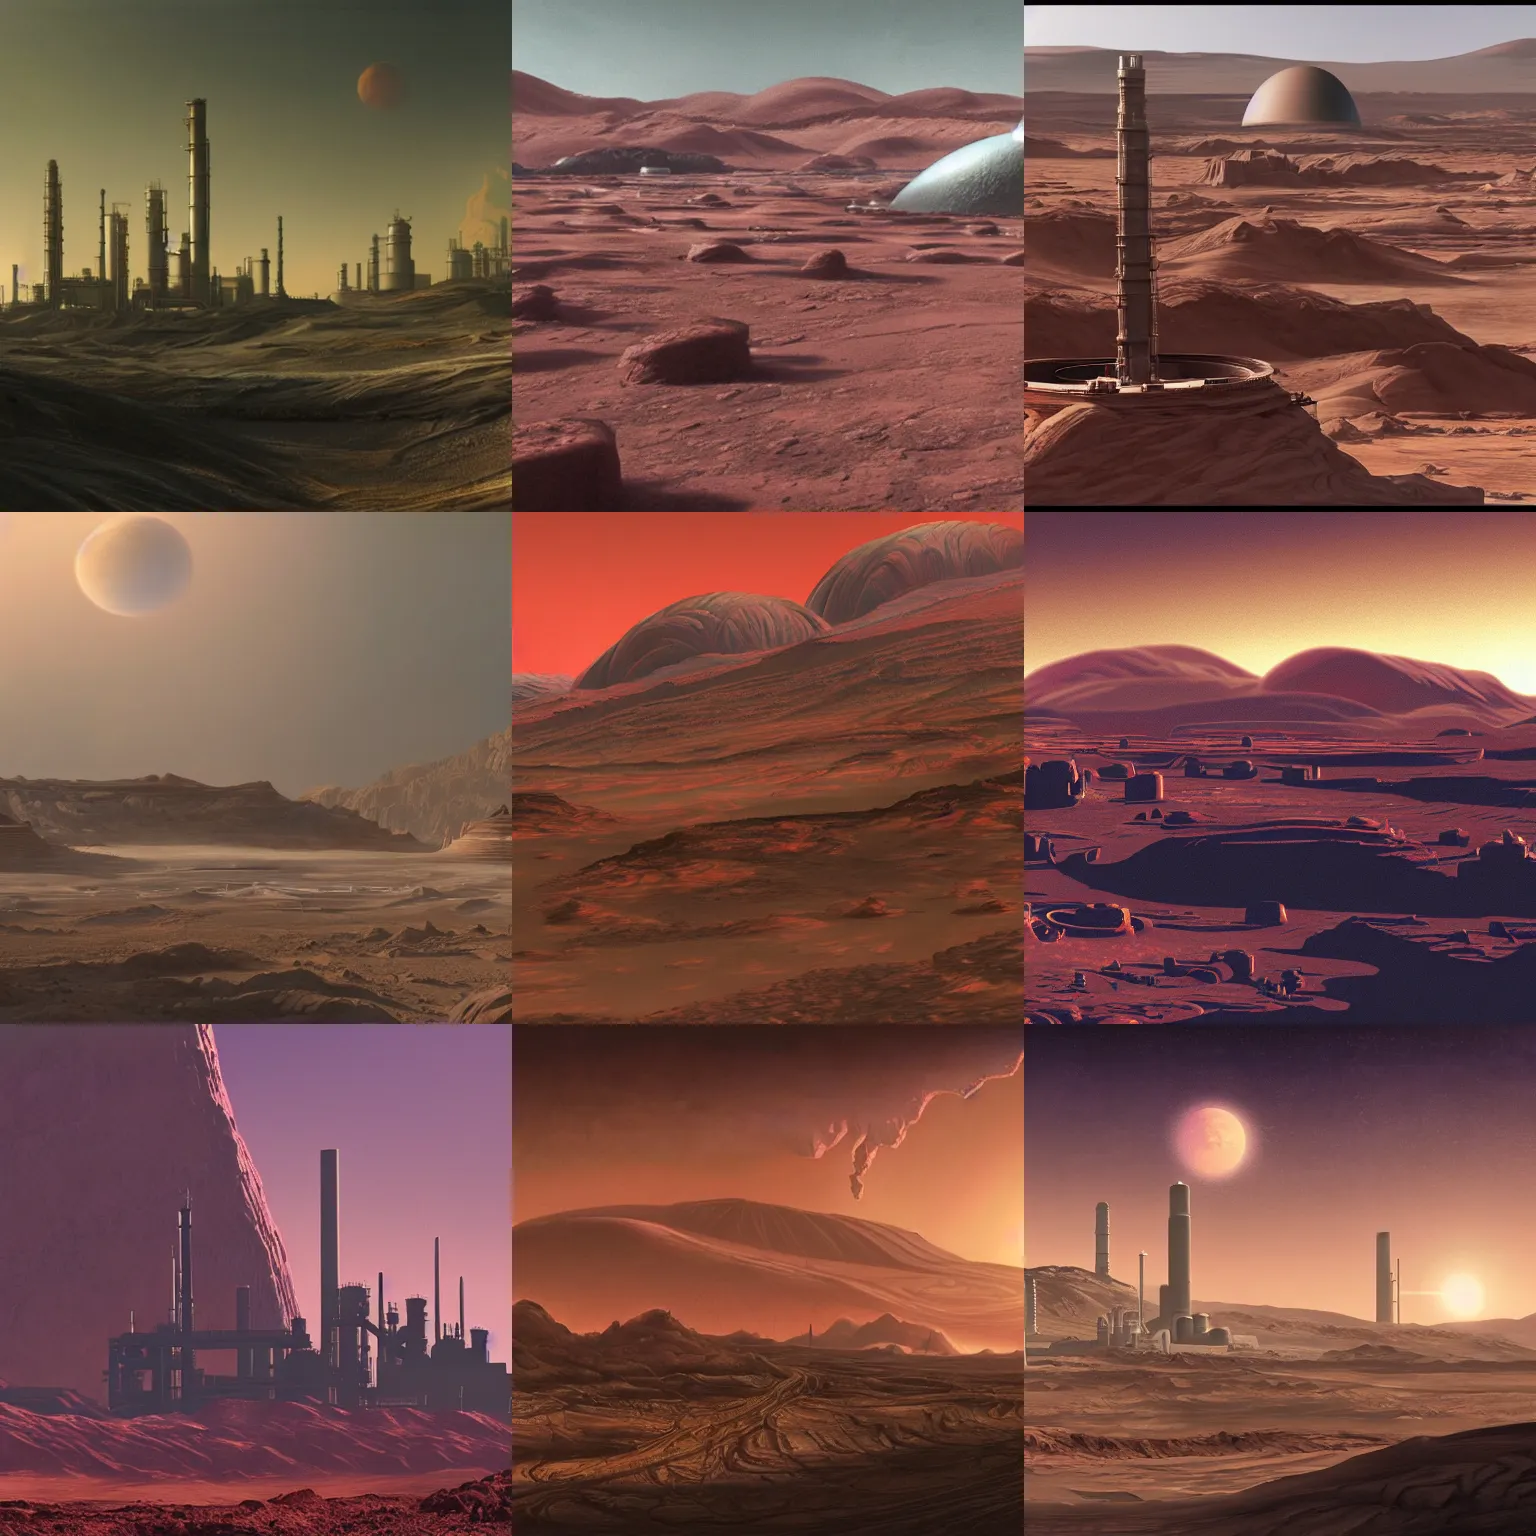 Prompt: a matte painting of a Martian landscape with a shiny metallic refinery in the background